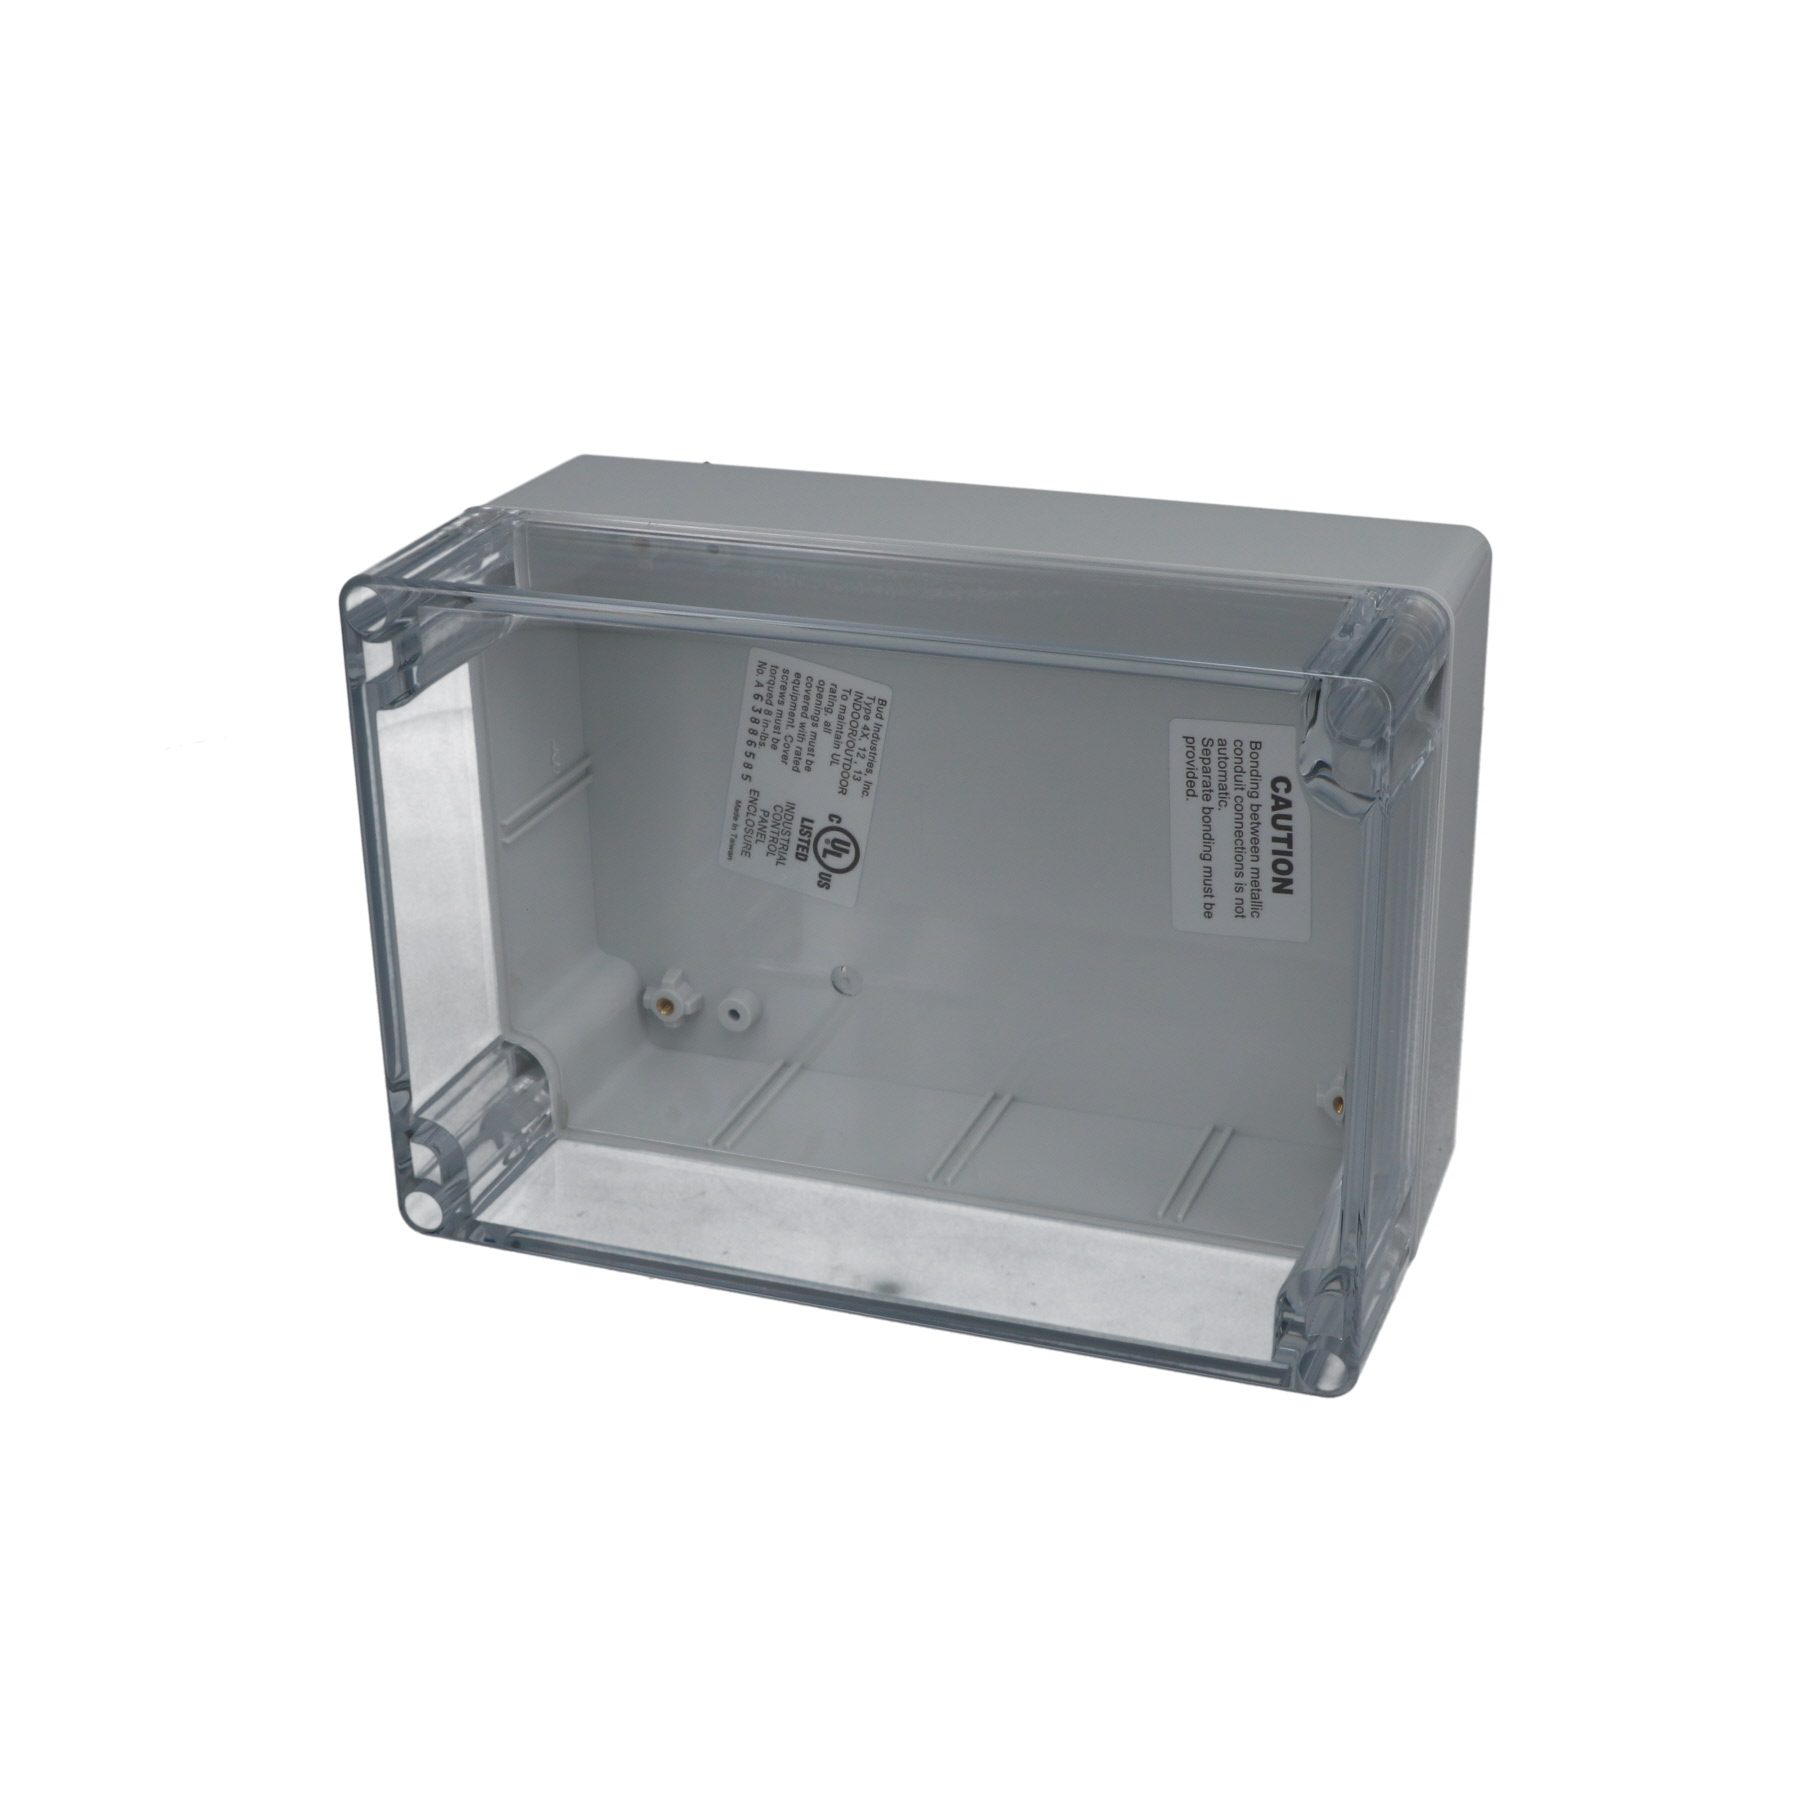 IP65 NEMA 4X Box with Clear Cover PN-1327-C